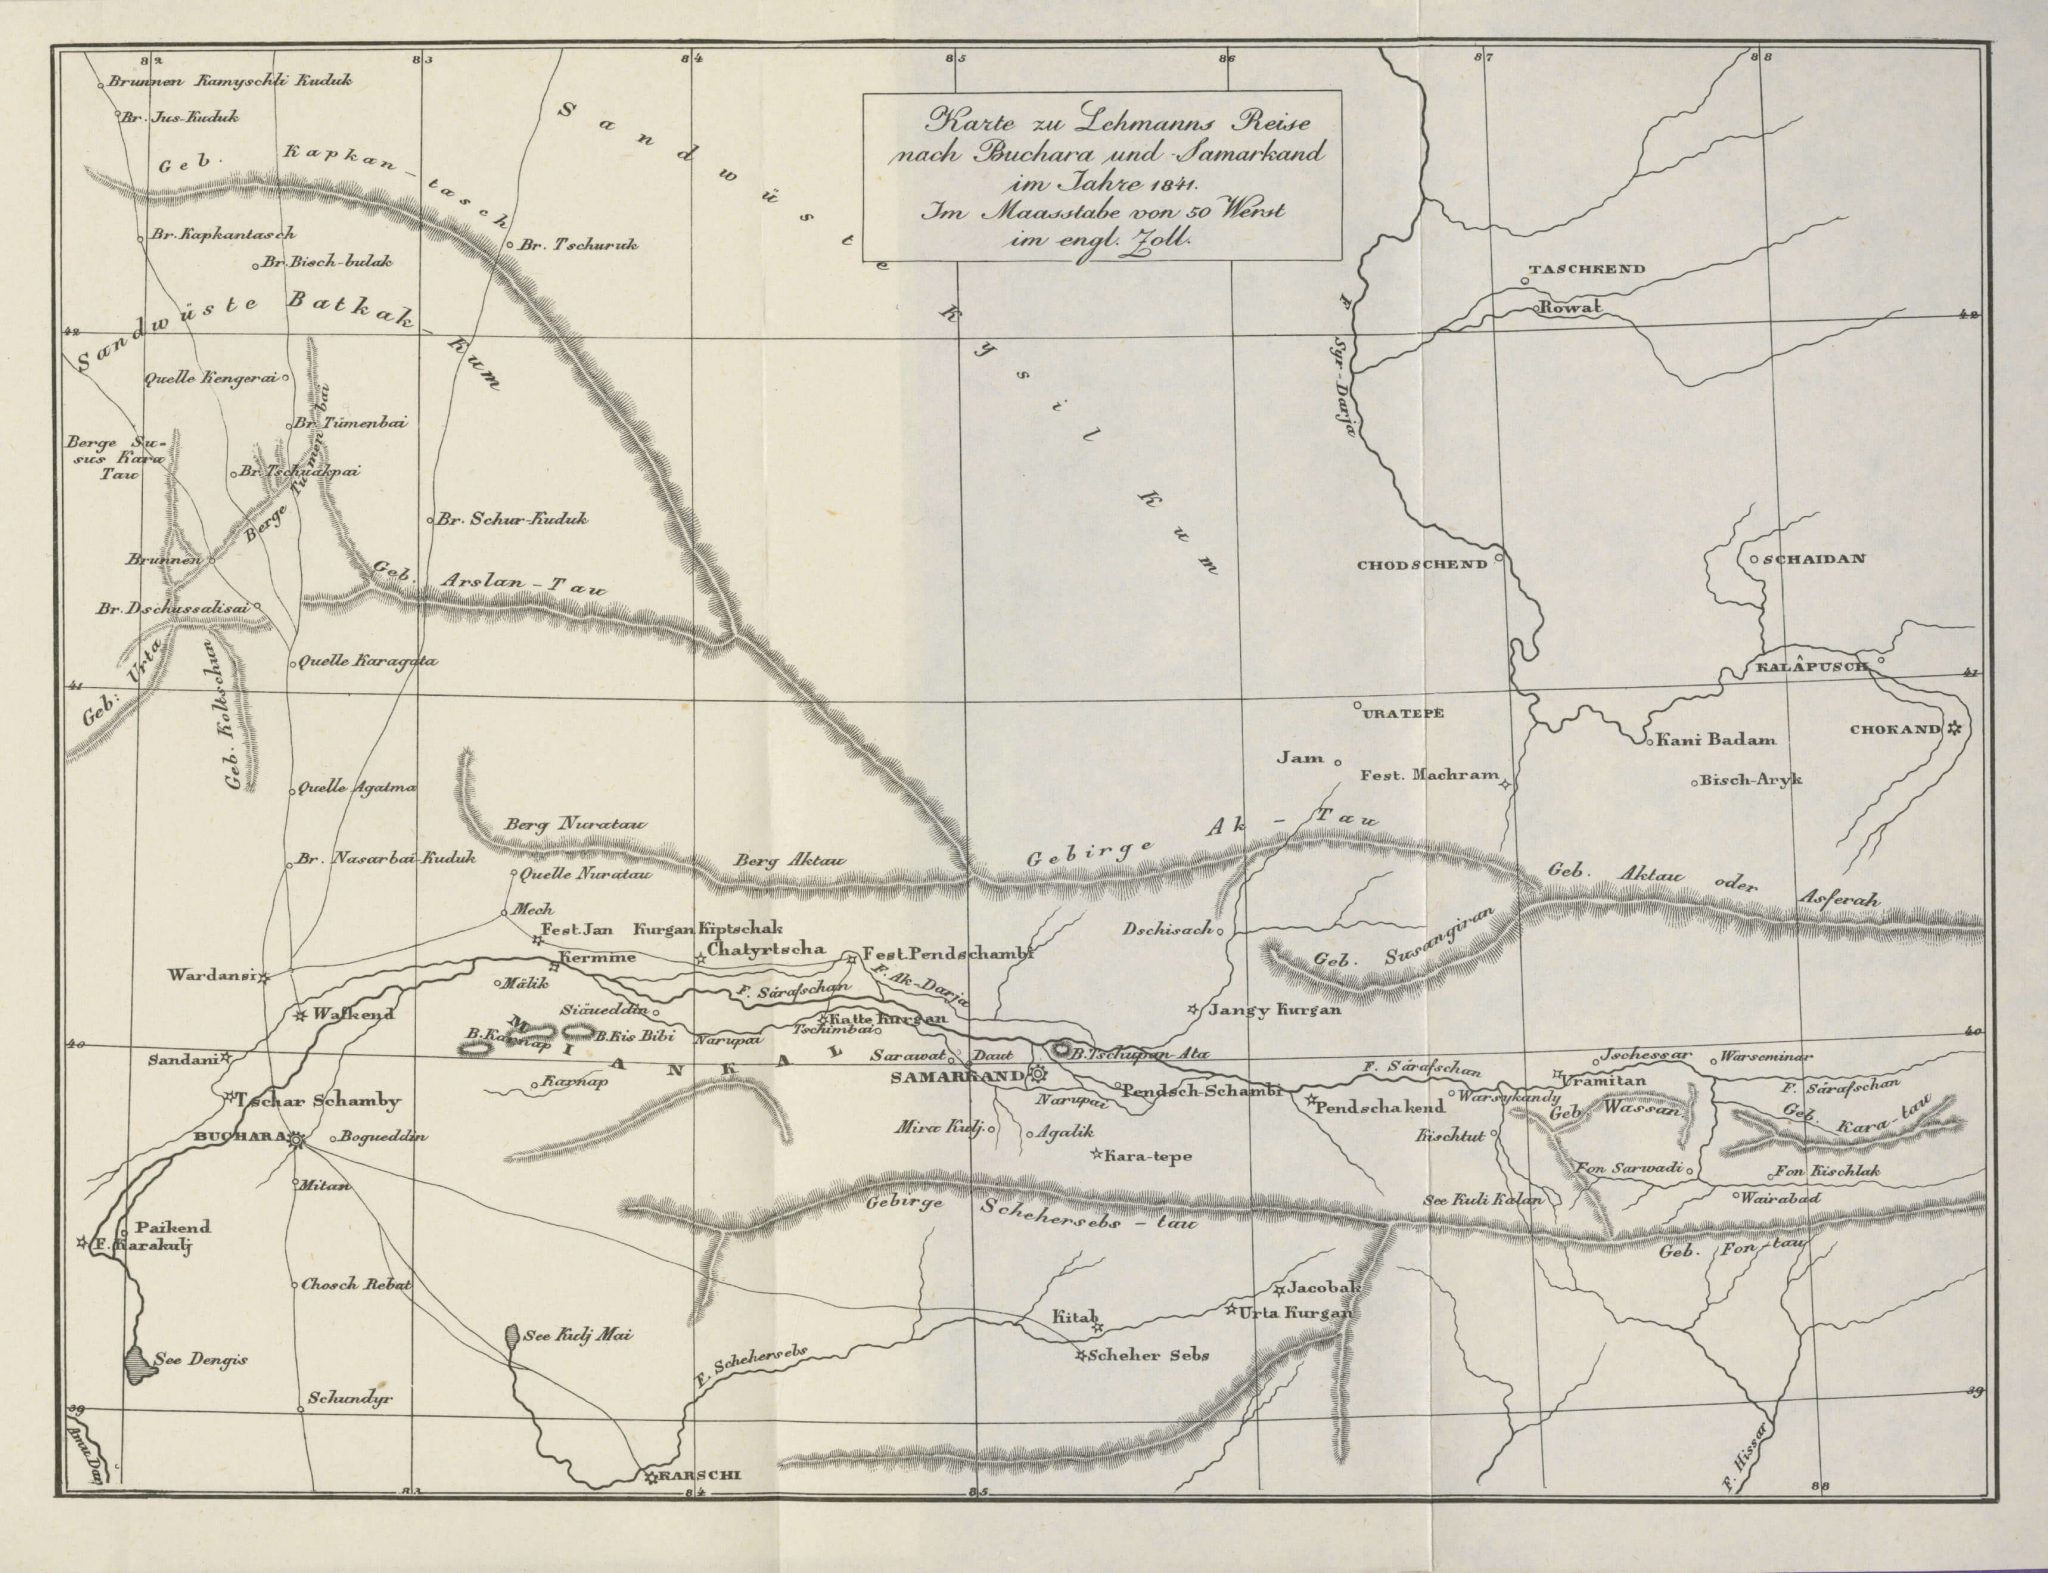 The travel route of Lehmanns to Bukhara and Samarkand in 1841